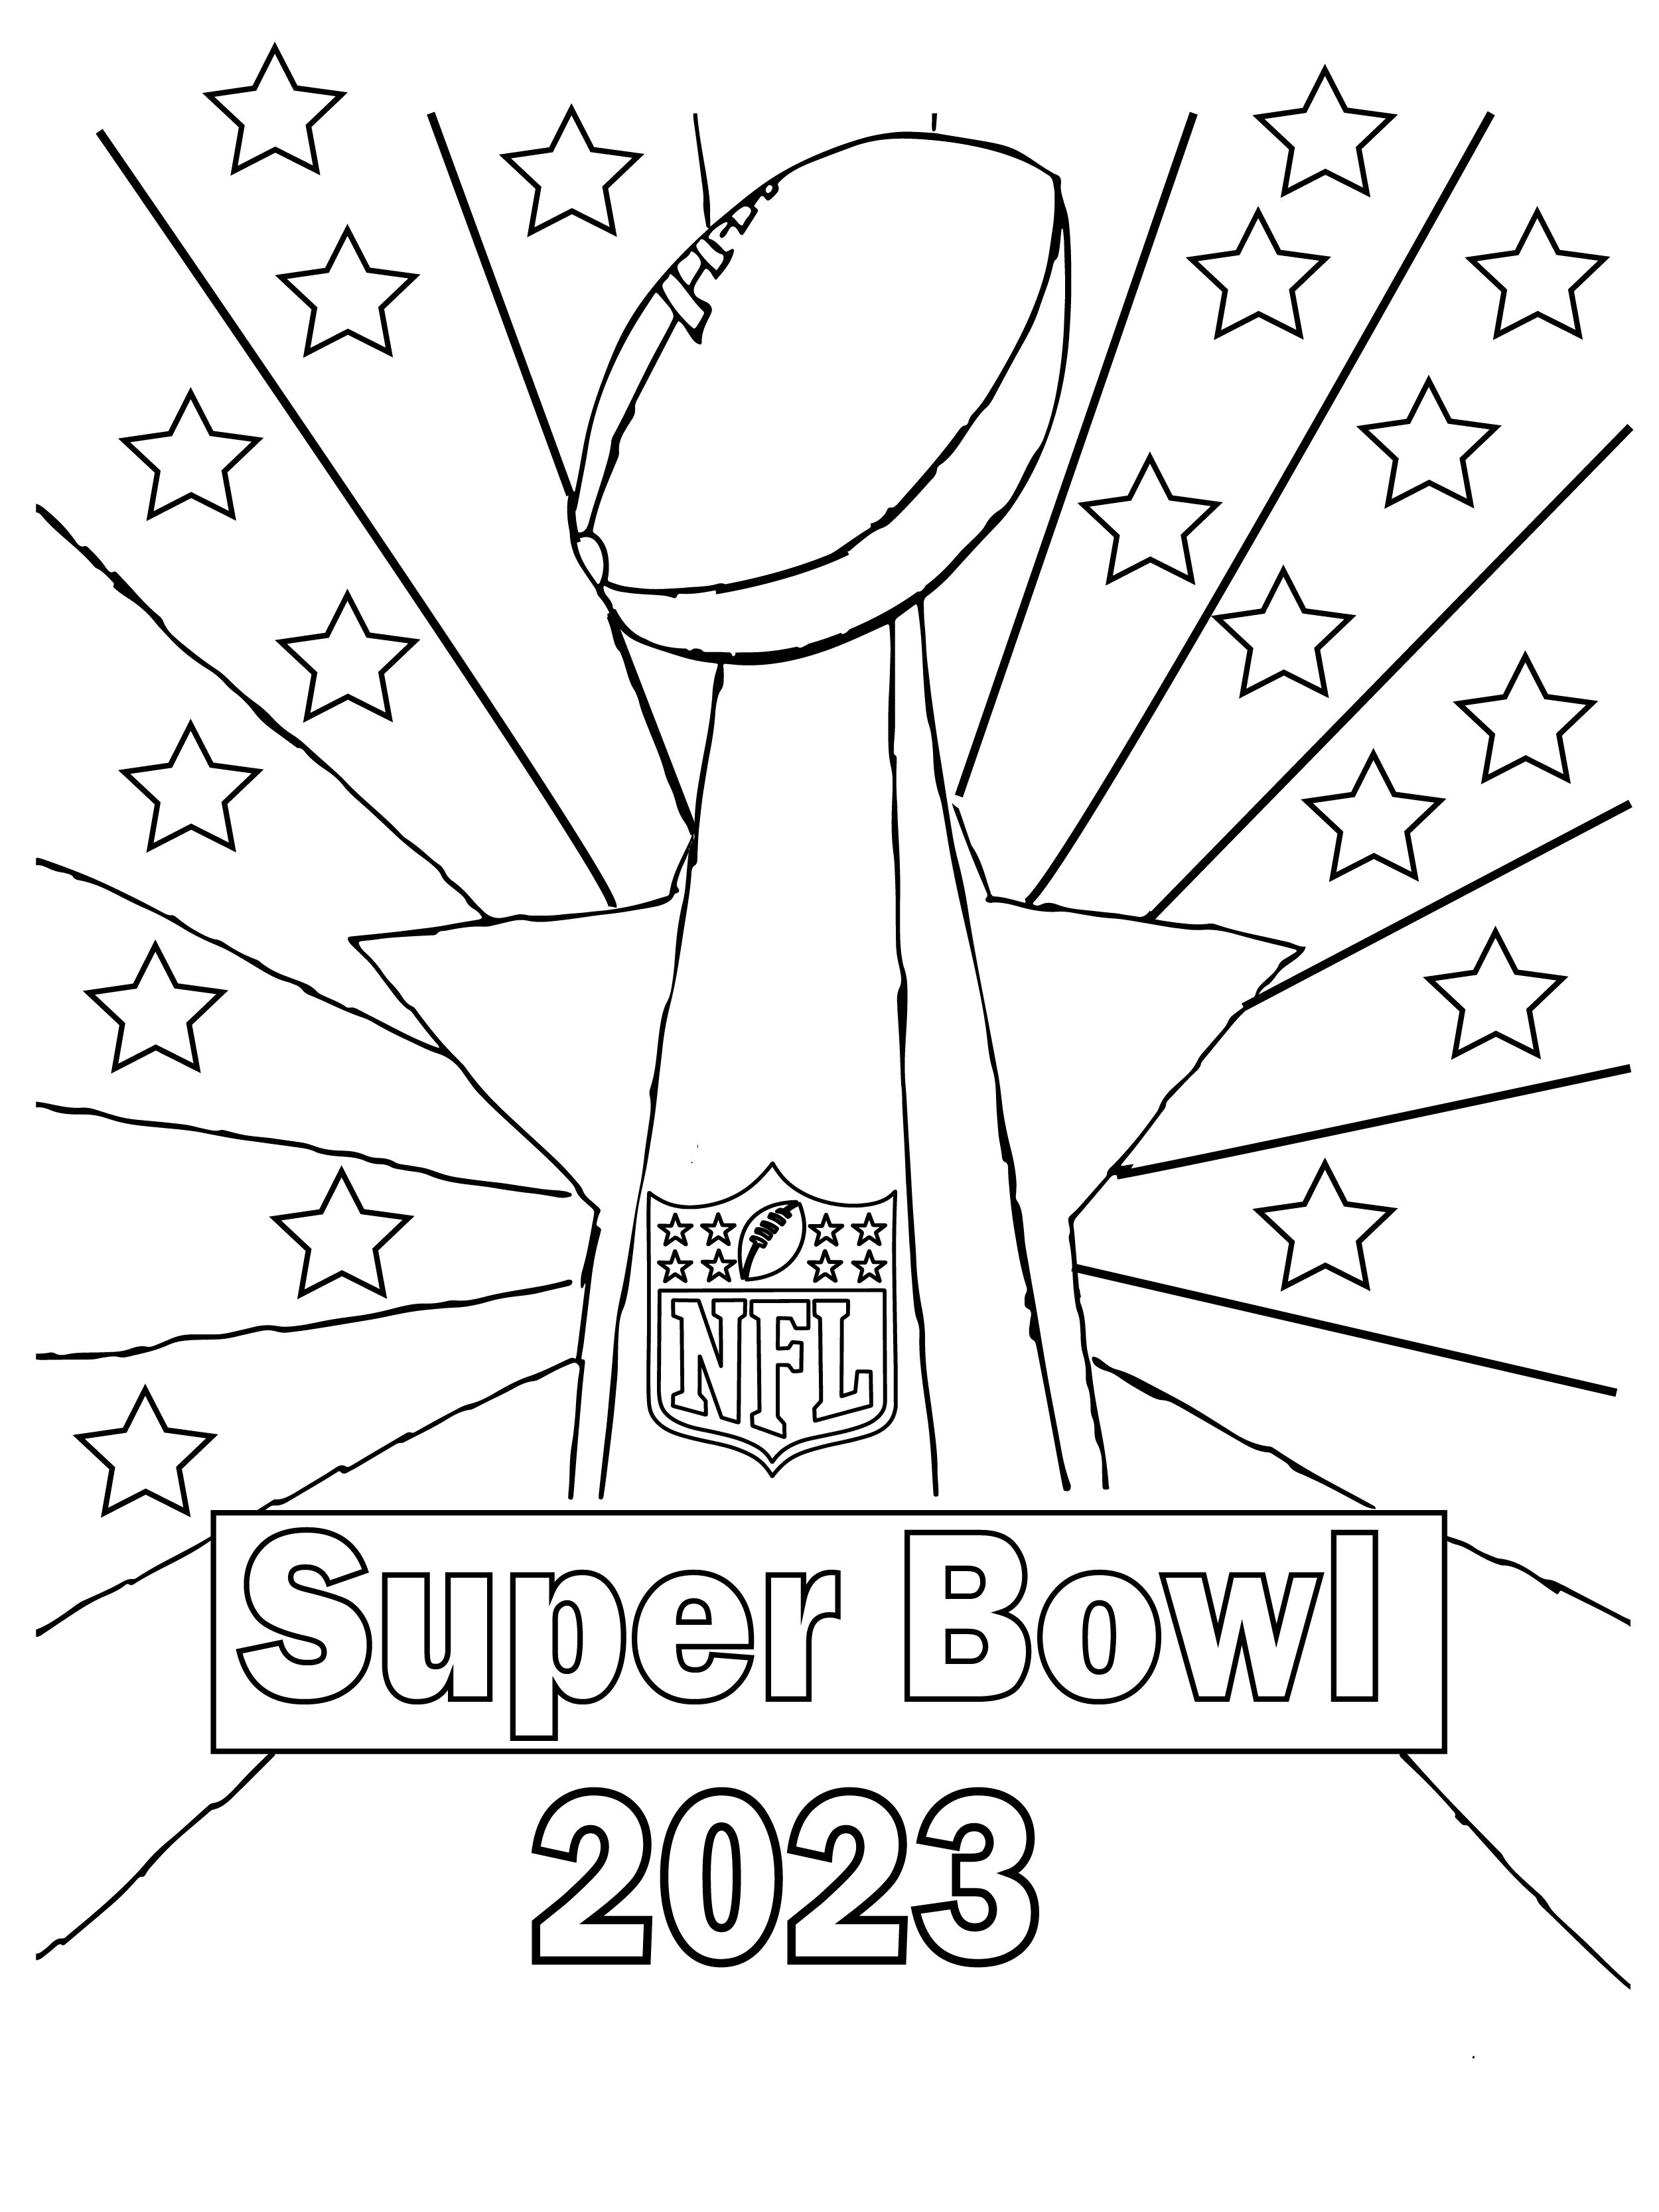 Super Bowl 2023 Coloring Page Free Printable Coloring Pages for Kids